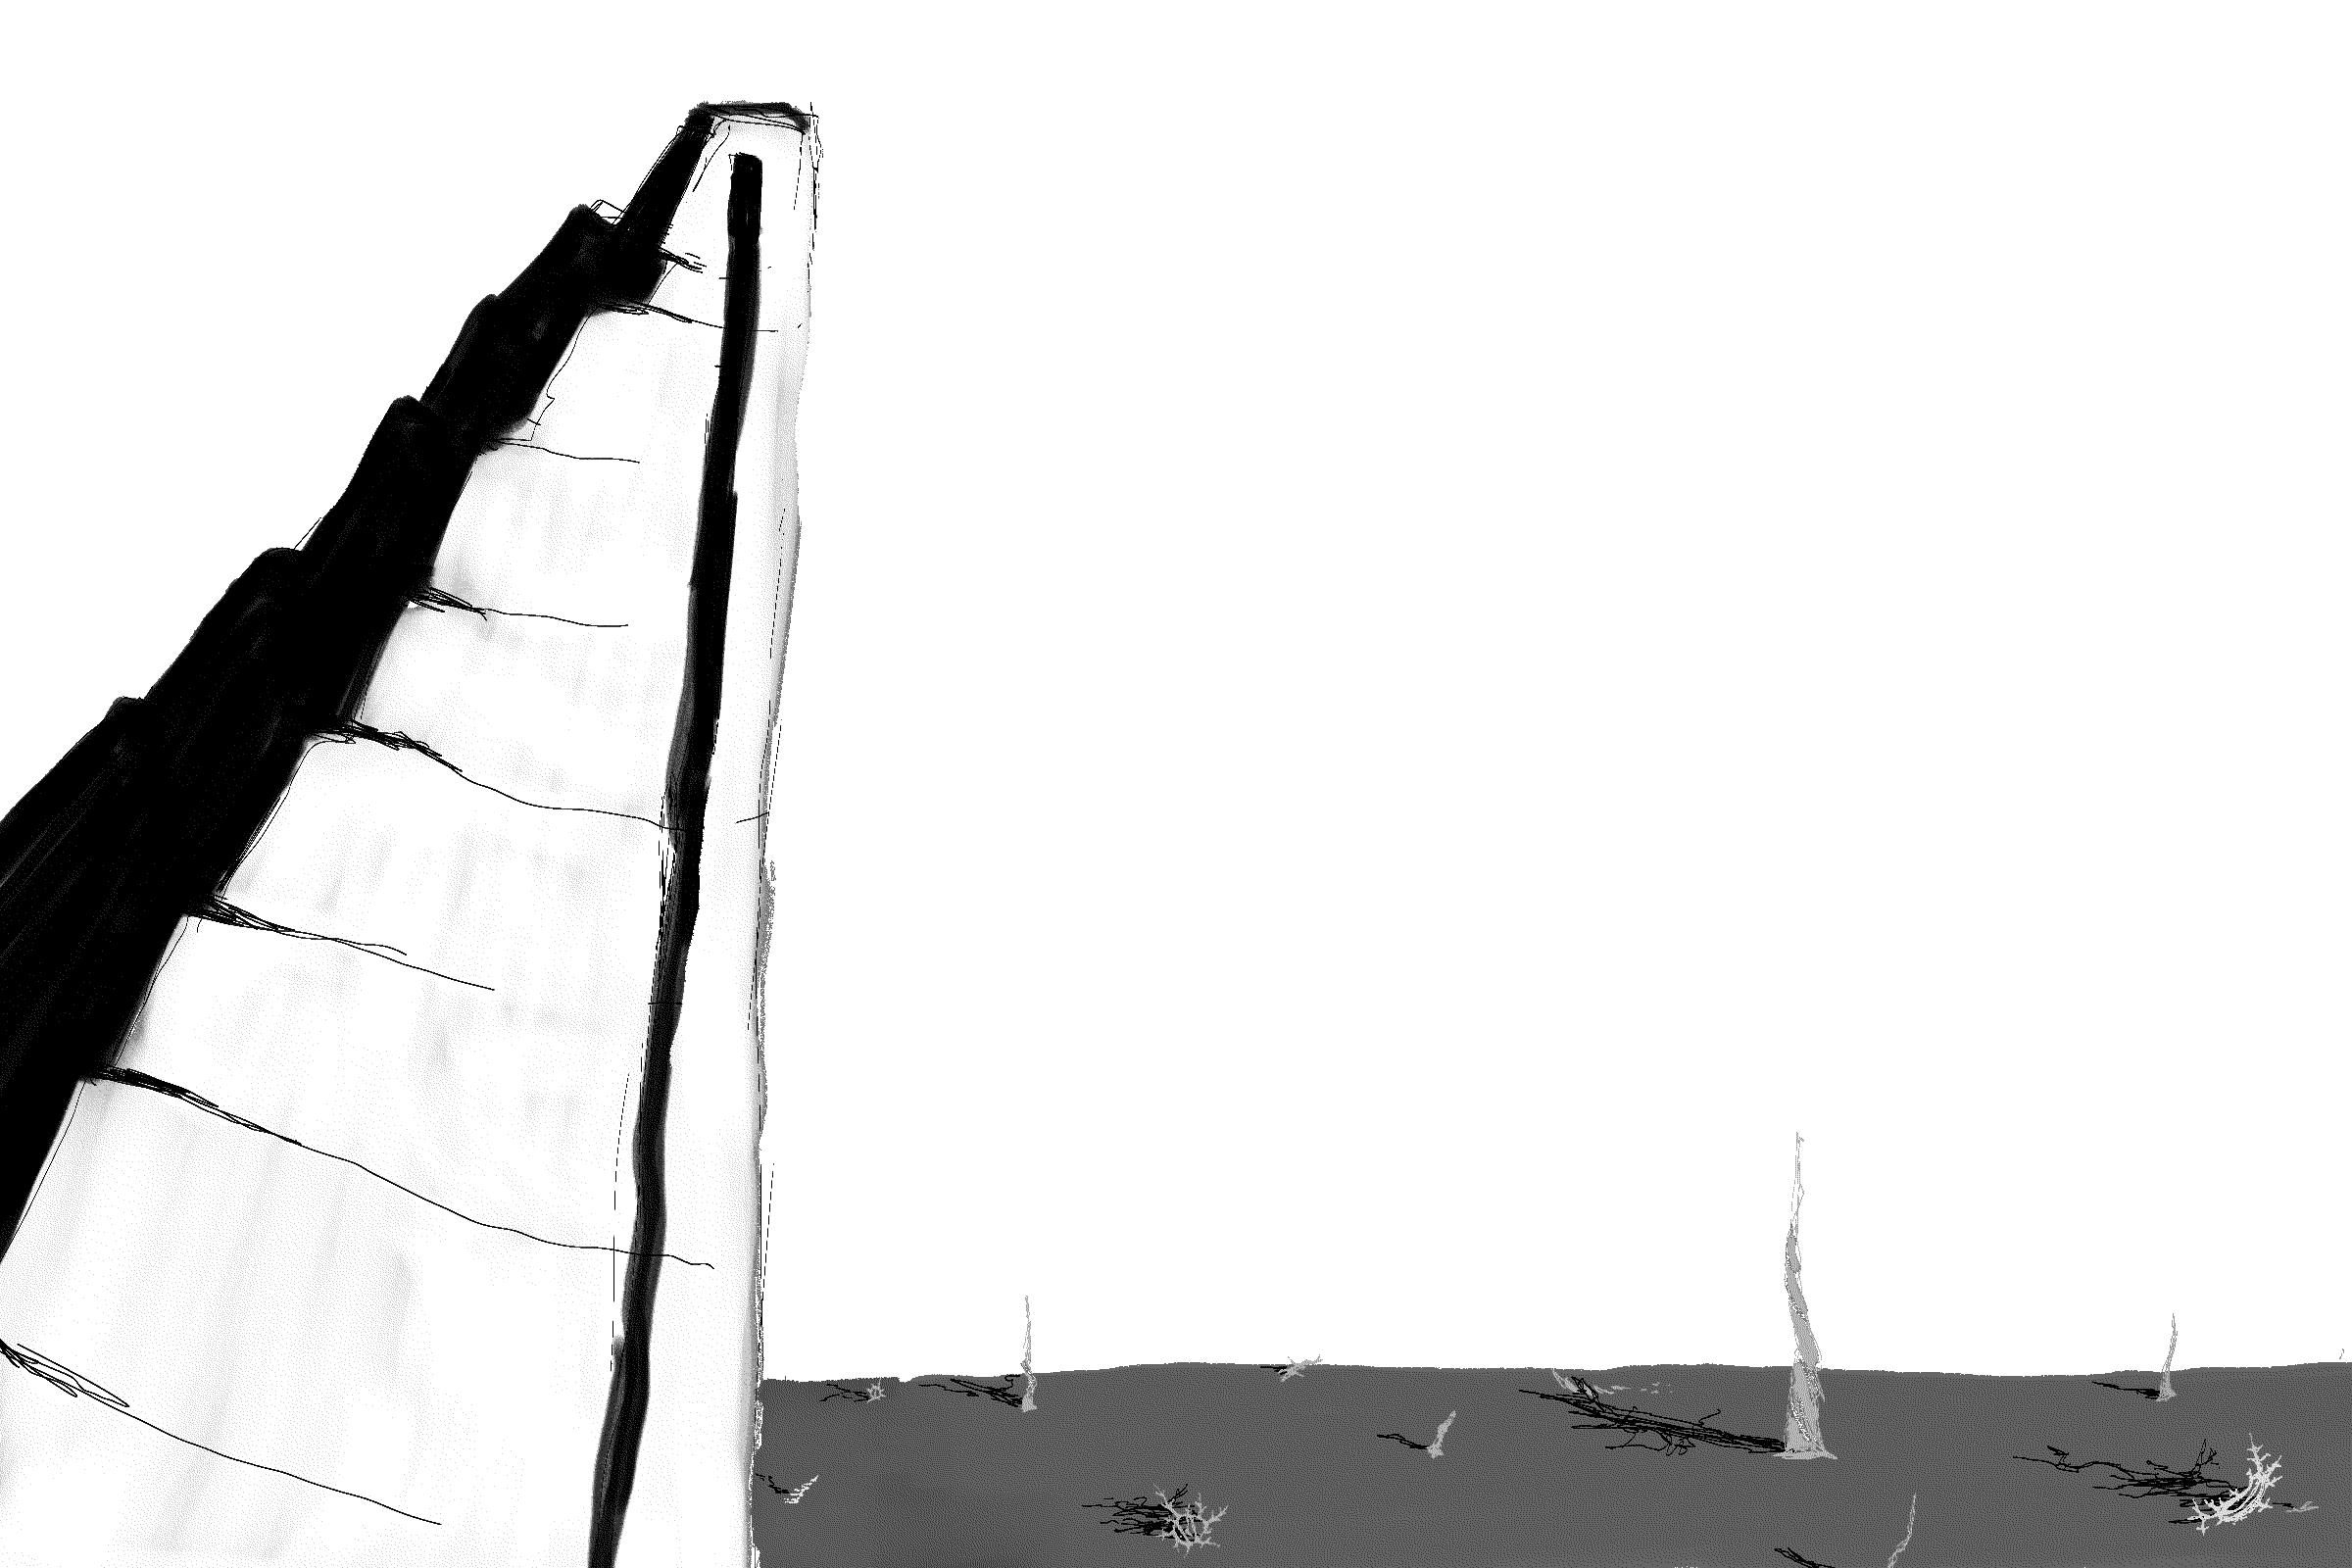 grayscale drawing. a white tower looms over a plain of scattered objects. the shadows are long and harsh.